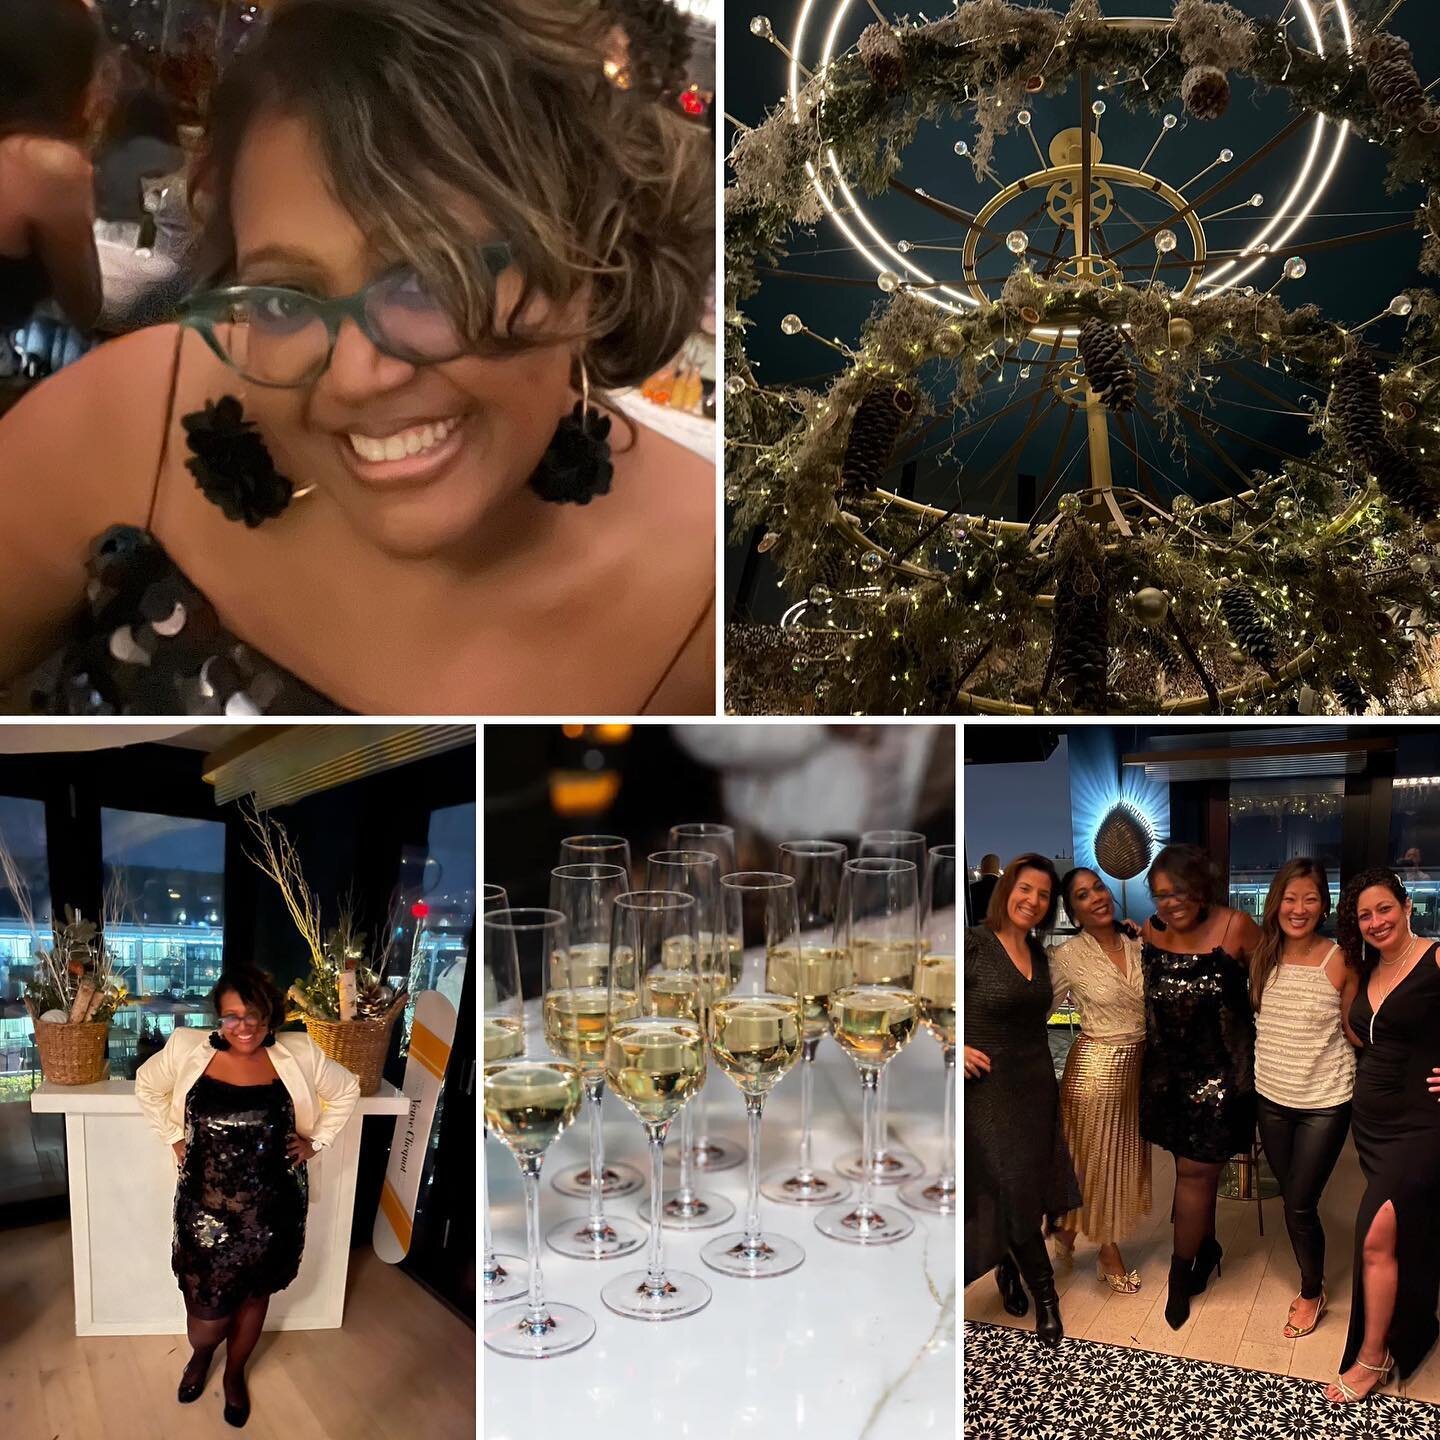 Dare to sparkle ~ One of the most powerful gifts you can give to yourself and others is to allow God&rsquo;s gifts in you to shine bright! Excited about this next birthday year! Celebrating with friends, lots of laughter, and cocktails. #ceilsocialcl